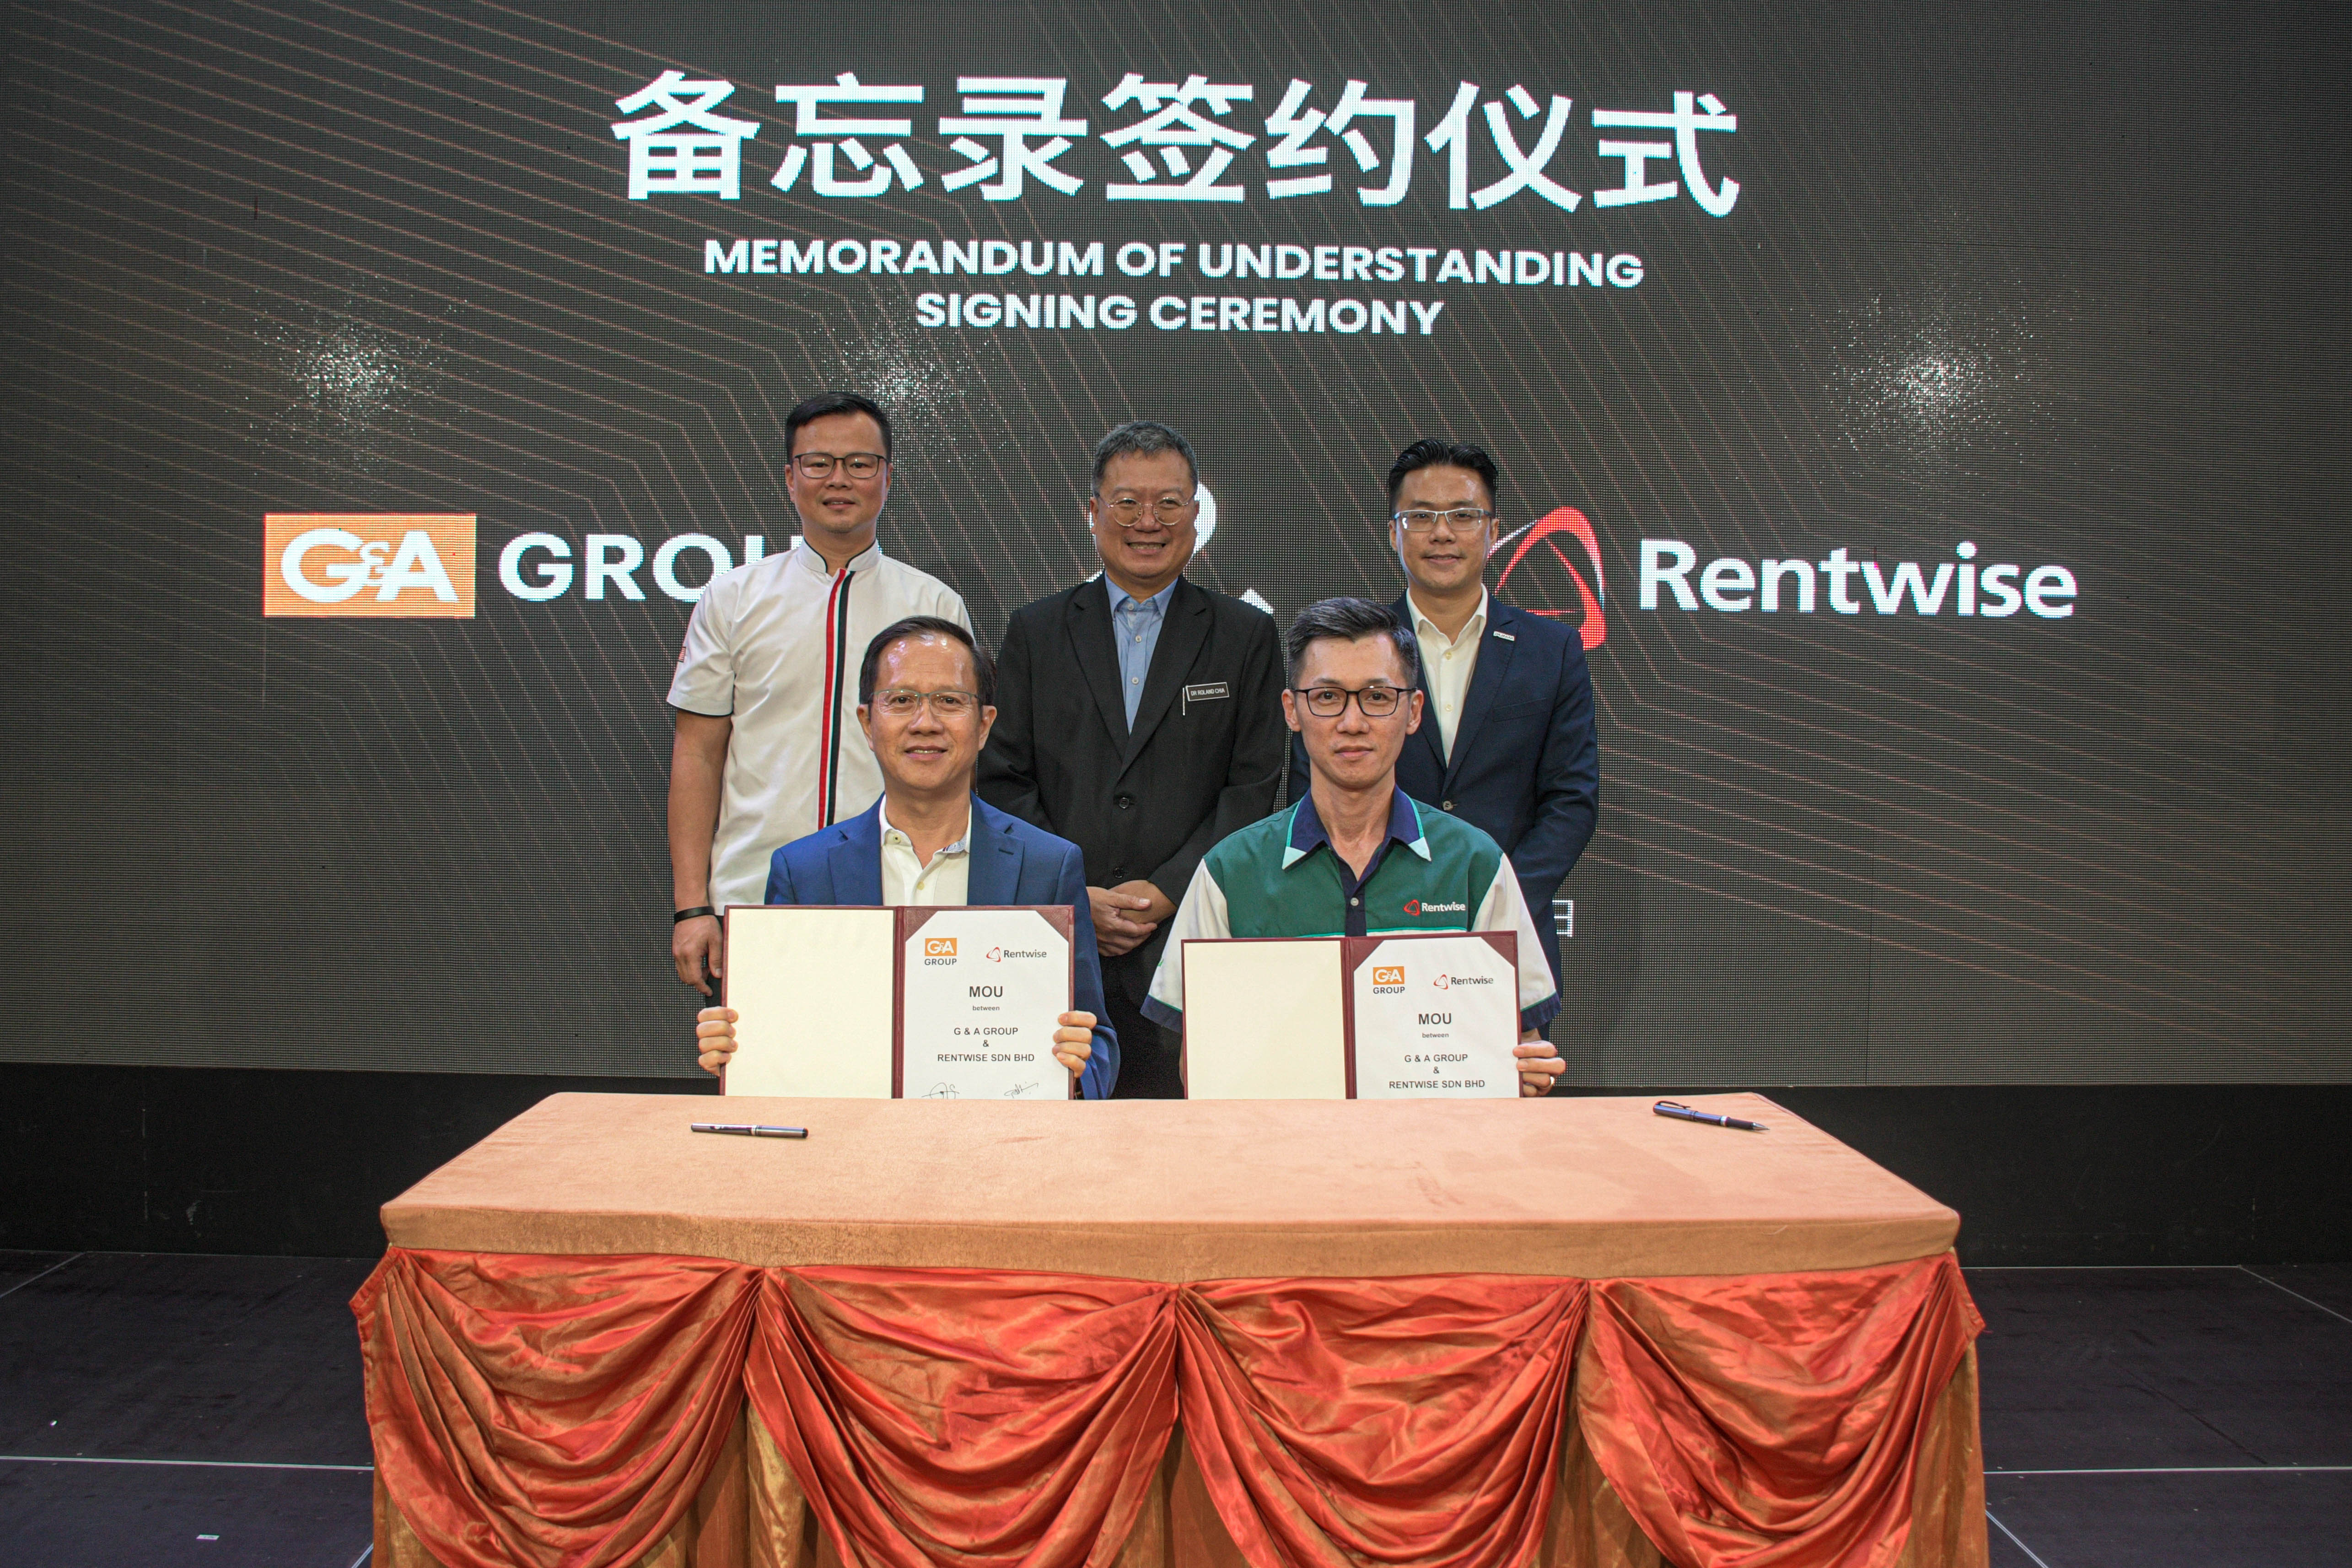 Dato George Lim (seated, left) and Lanz Boo (seated, right) signed a Memorandum of Understanding, witnessed by Datuk Roland Chia Ming Shen (standing, middle), Mr. Patrick Chiam (standing, left), and Daniel Dea (standing, right)